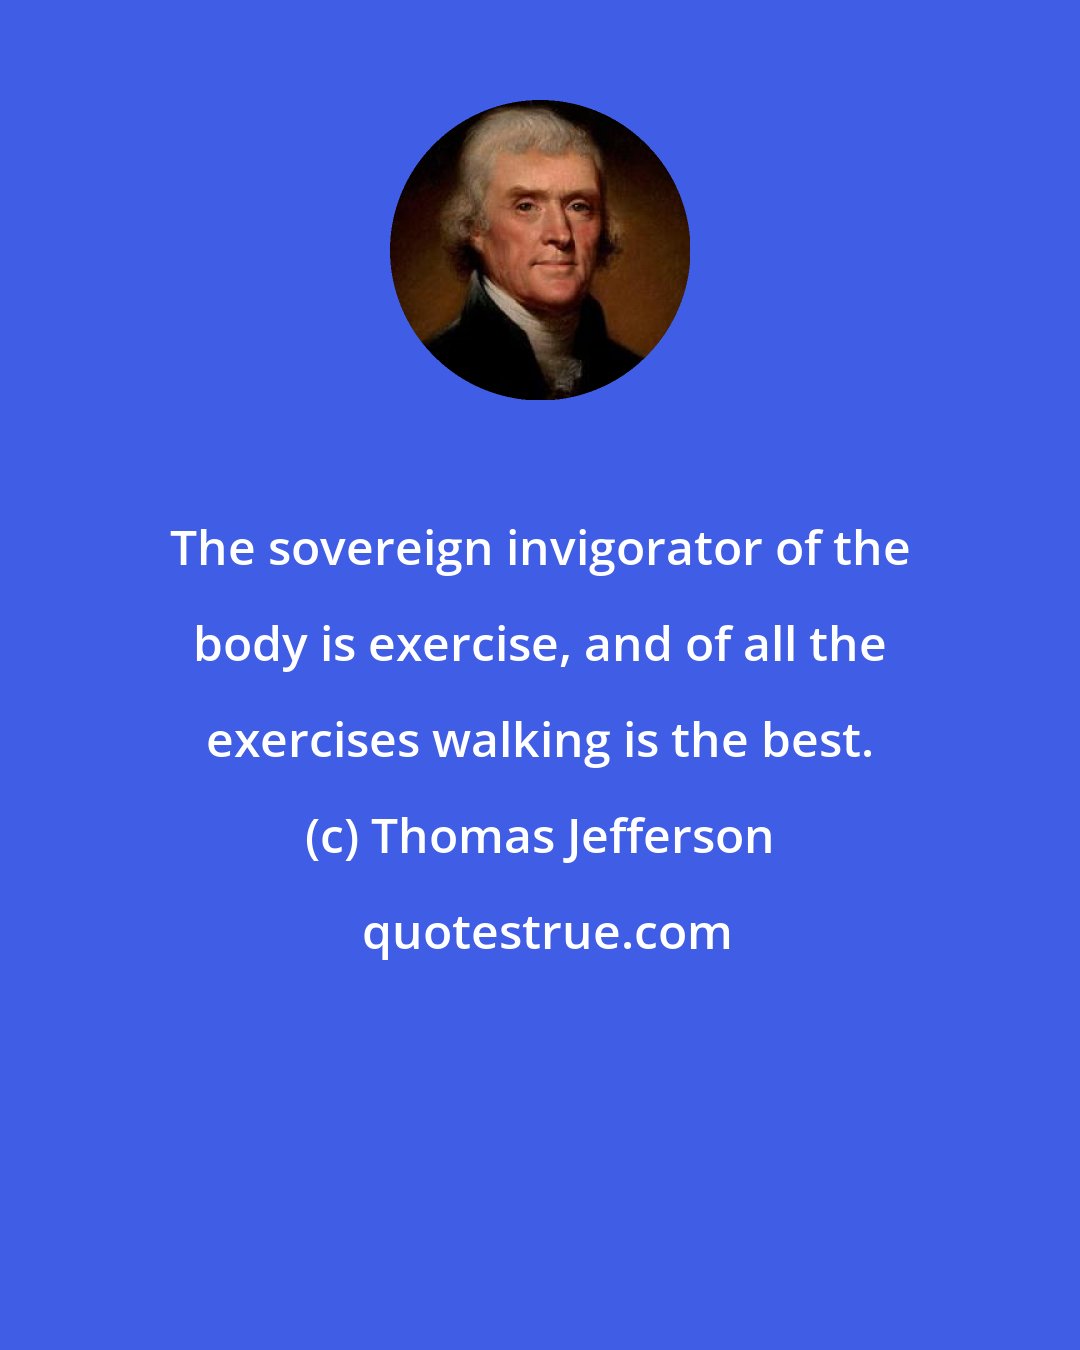 Thomas Jefferson: The sovereign invigorator of the body is exercise, and of all the exercises walking is the best.